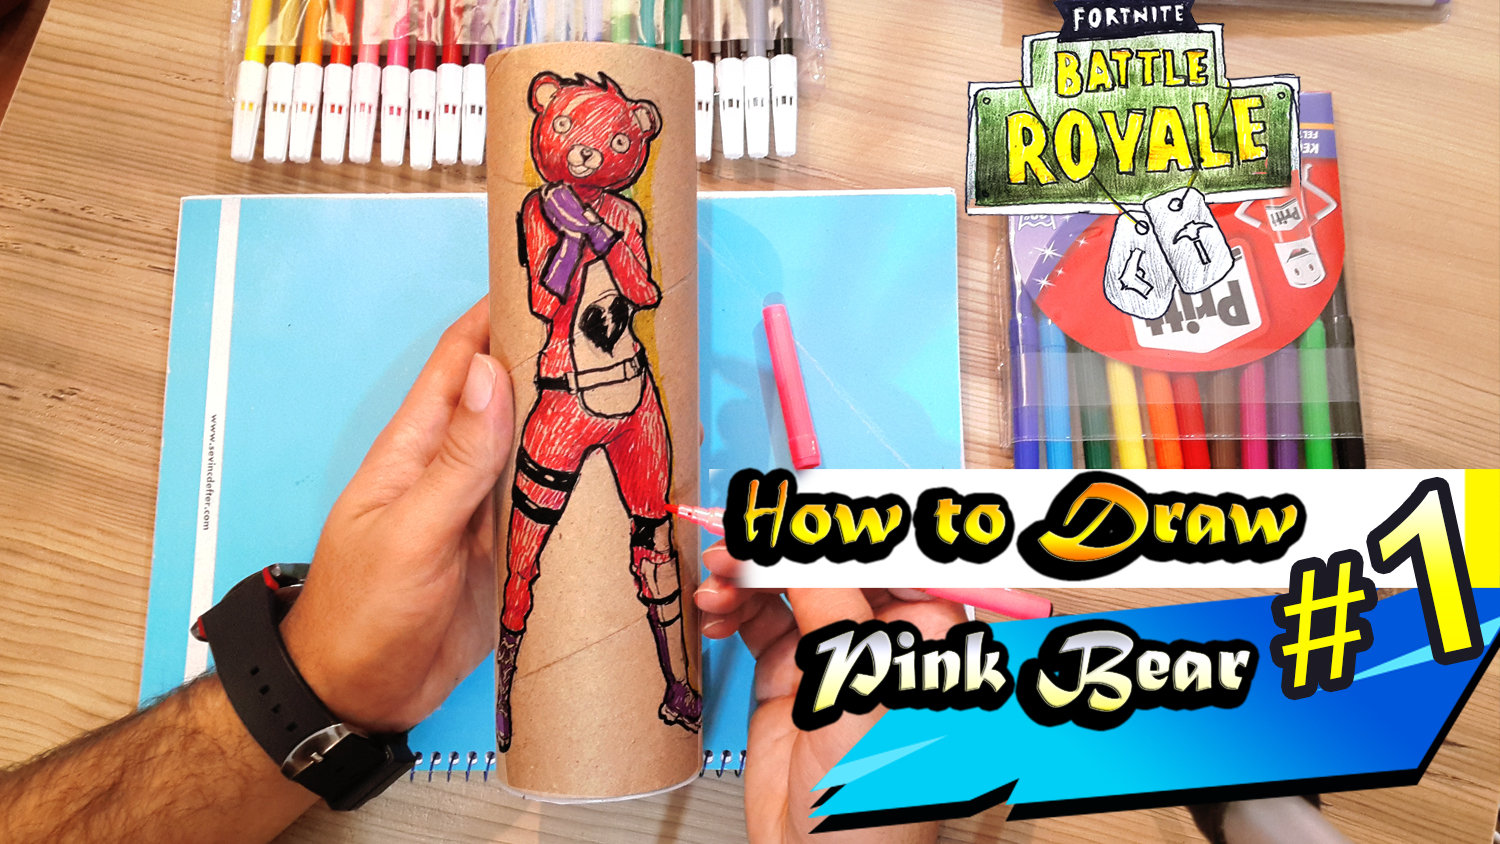 How to draw,cartoon people,animated cartoon,kids movies,movies for kids,draw fortnite,how to draw fortnite,cuddle team,fortnite skins,cuddle team leader,draw cuddle team,how to draw cuddle team,teddy bear skin,coloring with markers,How To Draw Pink Bear Fortnite